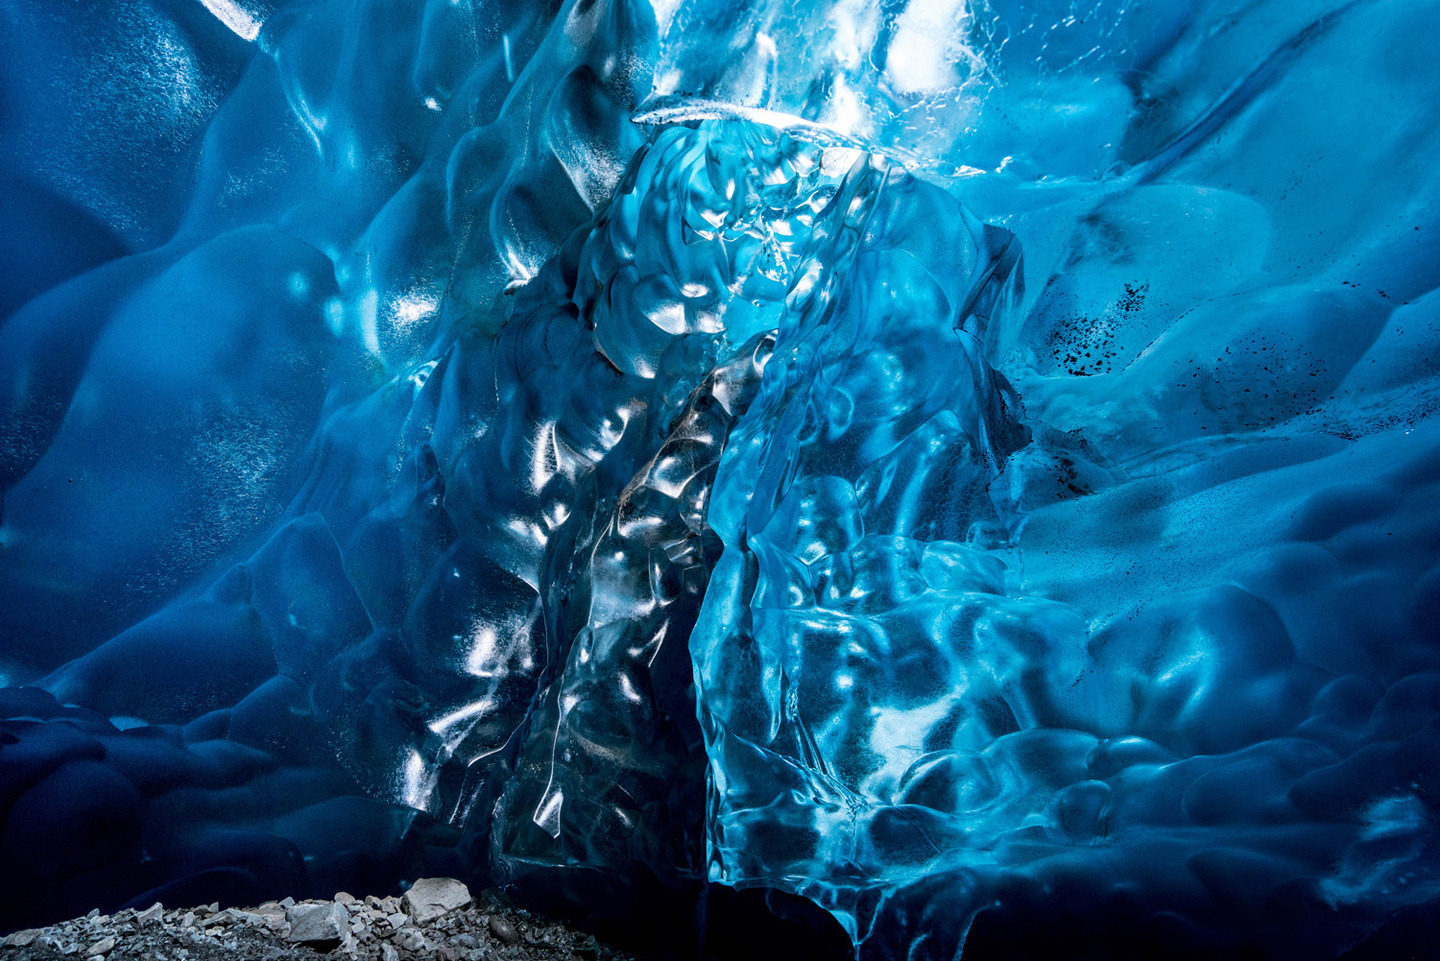 EMBARGOED FOR USE ONLINE AND PRINT UNTIL 00:01 26/11/15Inside the 'ABC cave' - which stands for Amazing Blue Cave Photographer explores Vatnaj&ouml;kull glacie using Sony's back-illuminated full-frame sensor, Iceland - 25 Nov 2015 *Full story: http://www.rexfeatures.com/nanolink/rm22 Photographer Mikael Buck with assistance from renowned local Icelandic guide Einar Runar Sigurdsson, explored the frozen world of Vatnaj&ouml;kull glacier in Iceland using Sony's world first back-illuminated full-frame sensor, which features in the 7R II camera. His images were taken without use of a tripod or any image stitching techniques in photoshop. This was made possible through Sony's new sensor technology, allowing incredibly detailed low-light hand held photography. Previously images this detailed would have required carrying bulky equipment to the caves, some of which can require hiking and climbing over a glacier for up to two hours to to access. The images were taken without the use of any external sources - just the natural light that filters through the ice caves.  (Rex Features via AP Images)